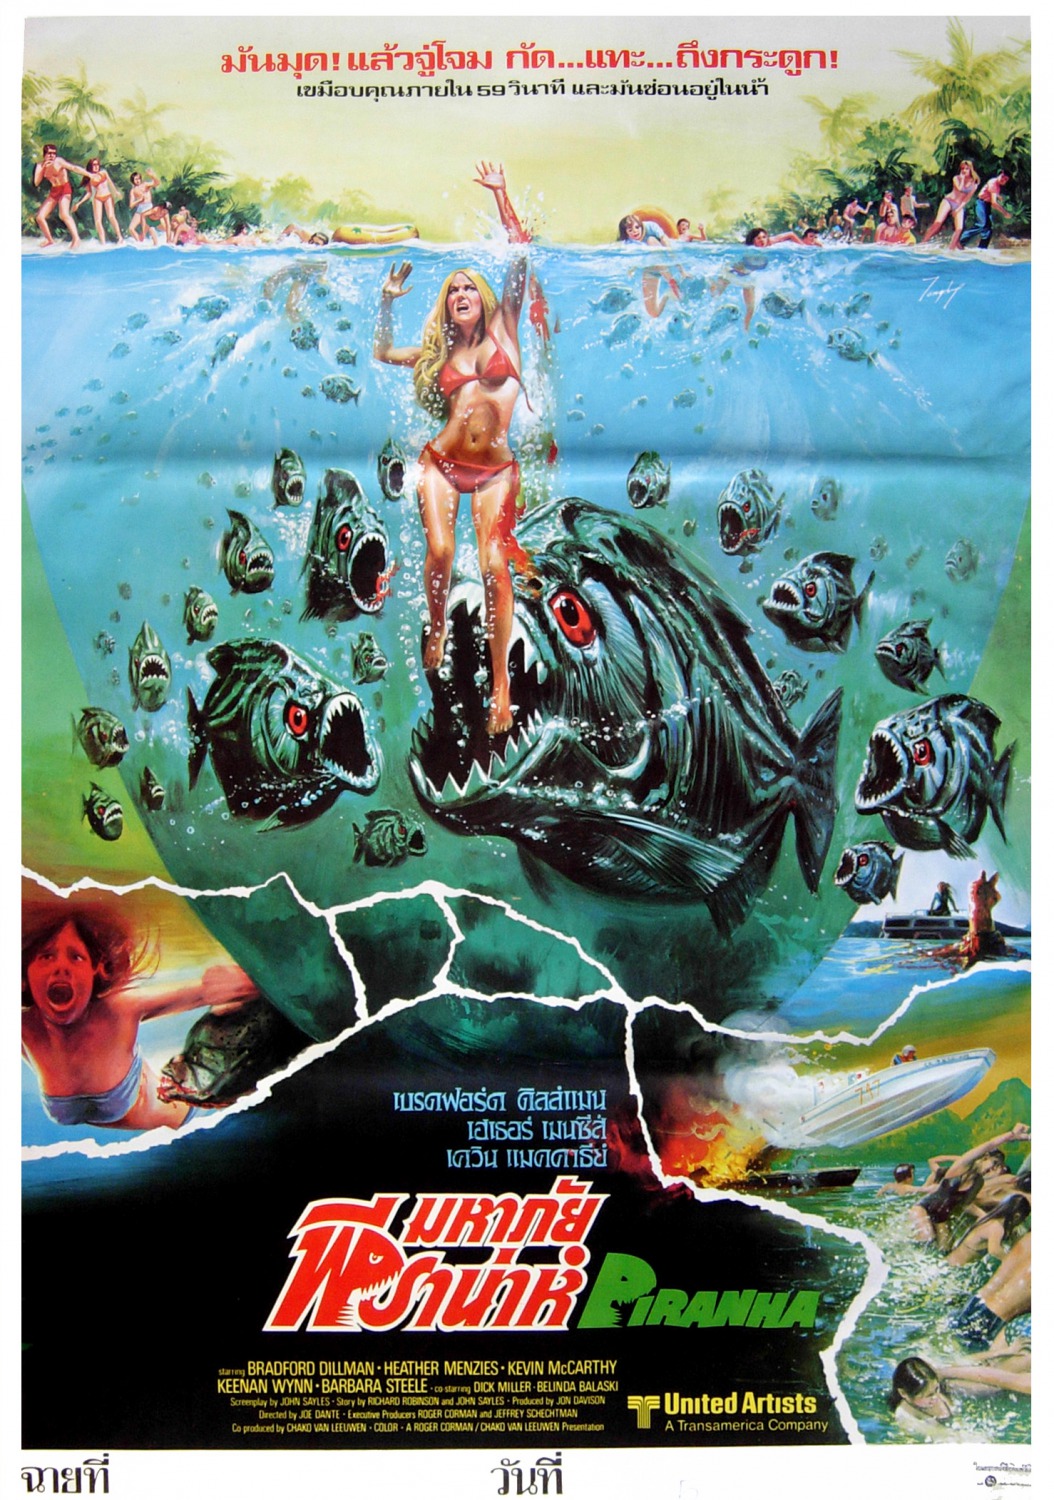 Extra Large Movie Poster Image for Piranha (#4 of 4)